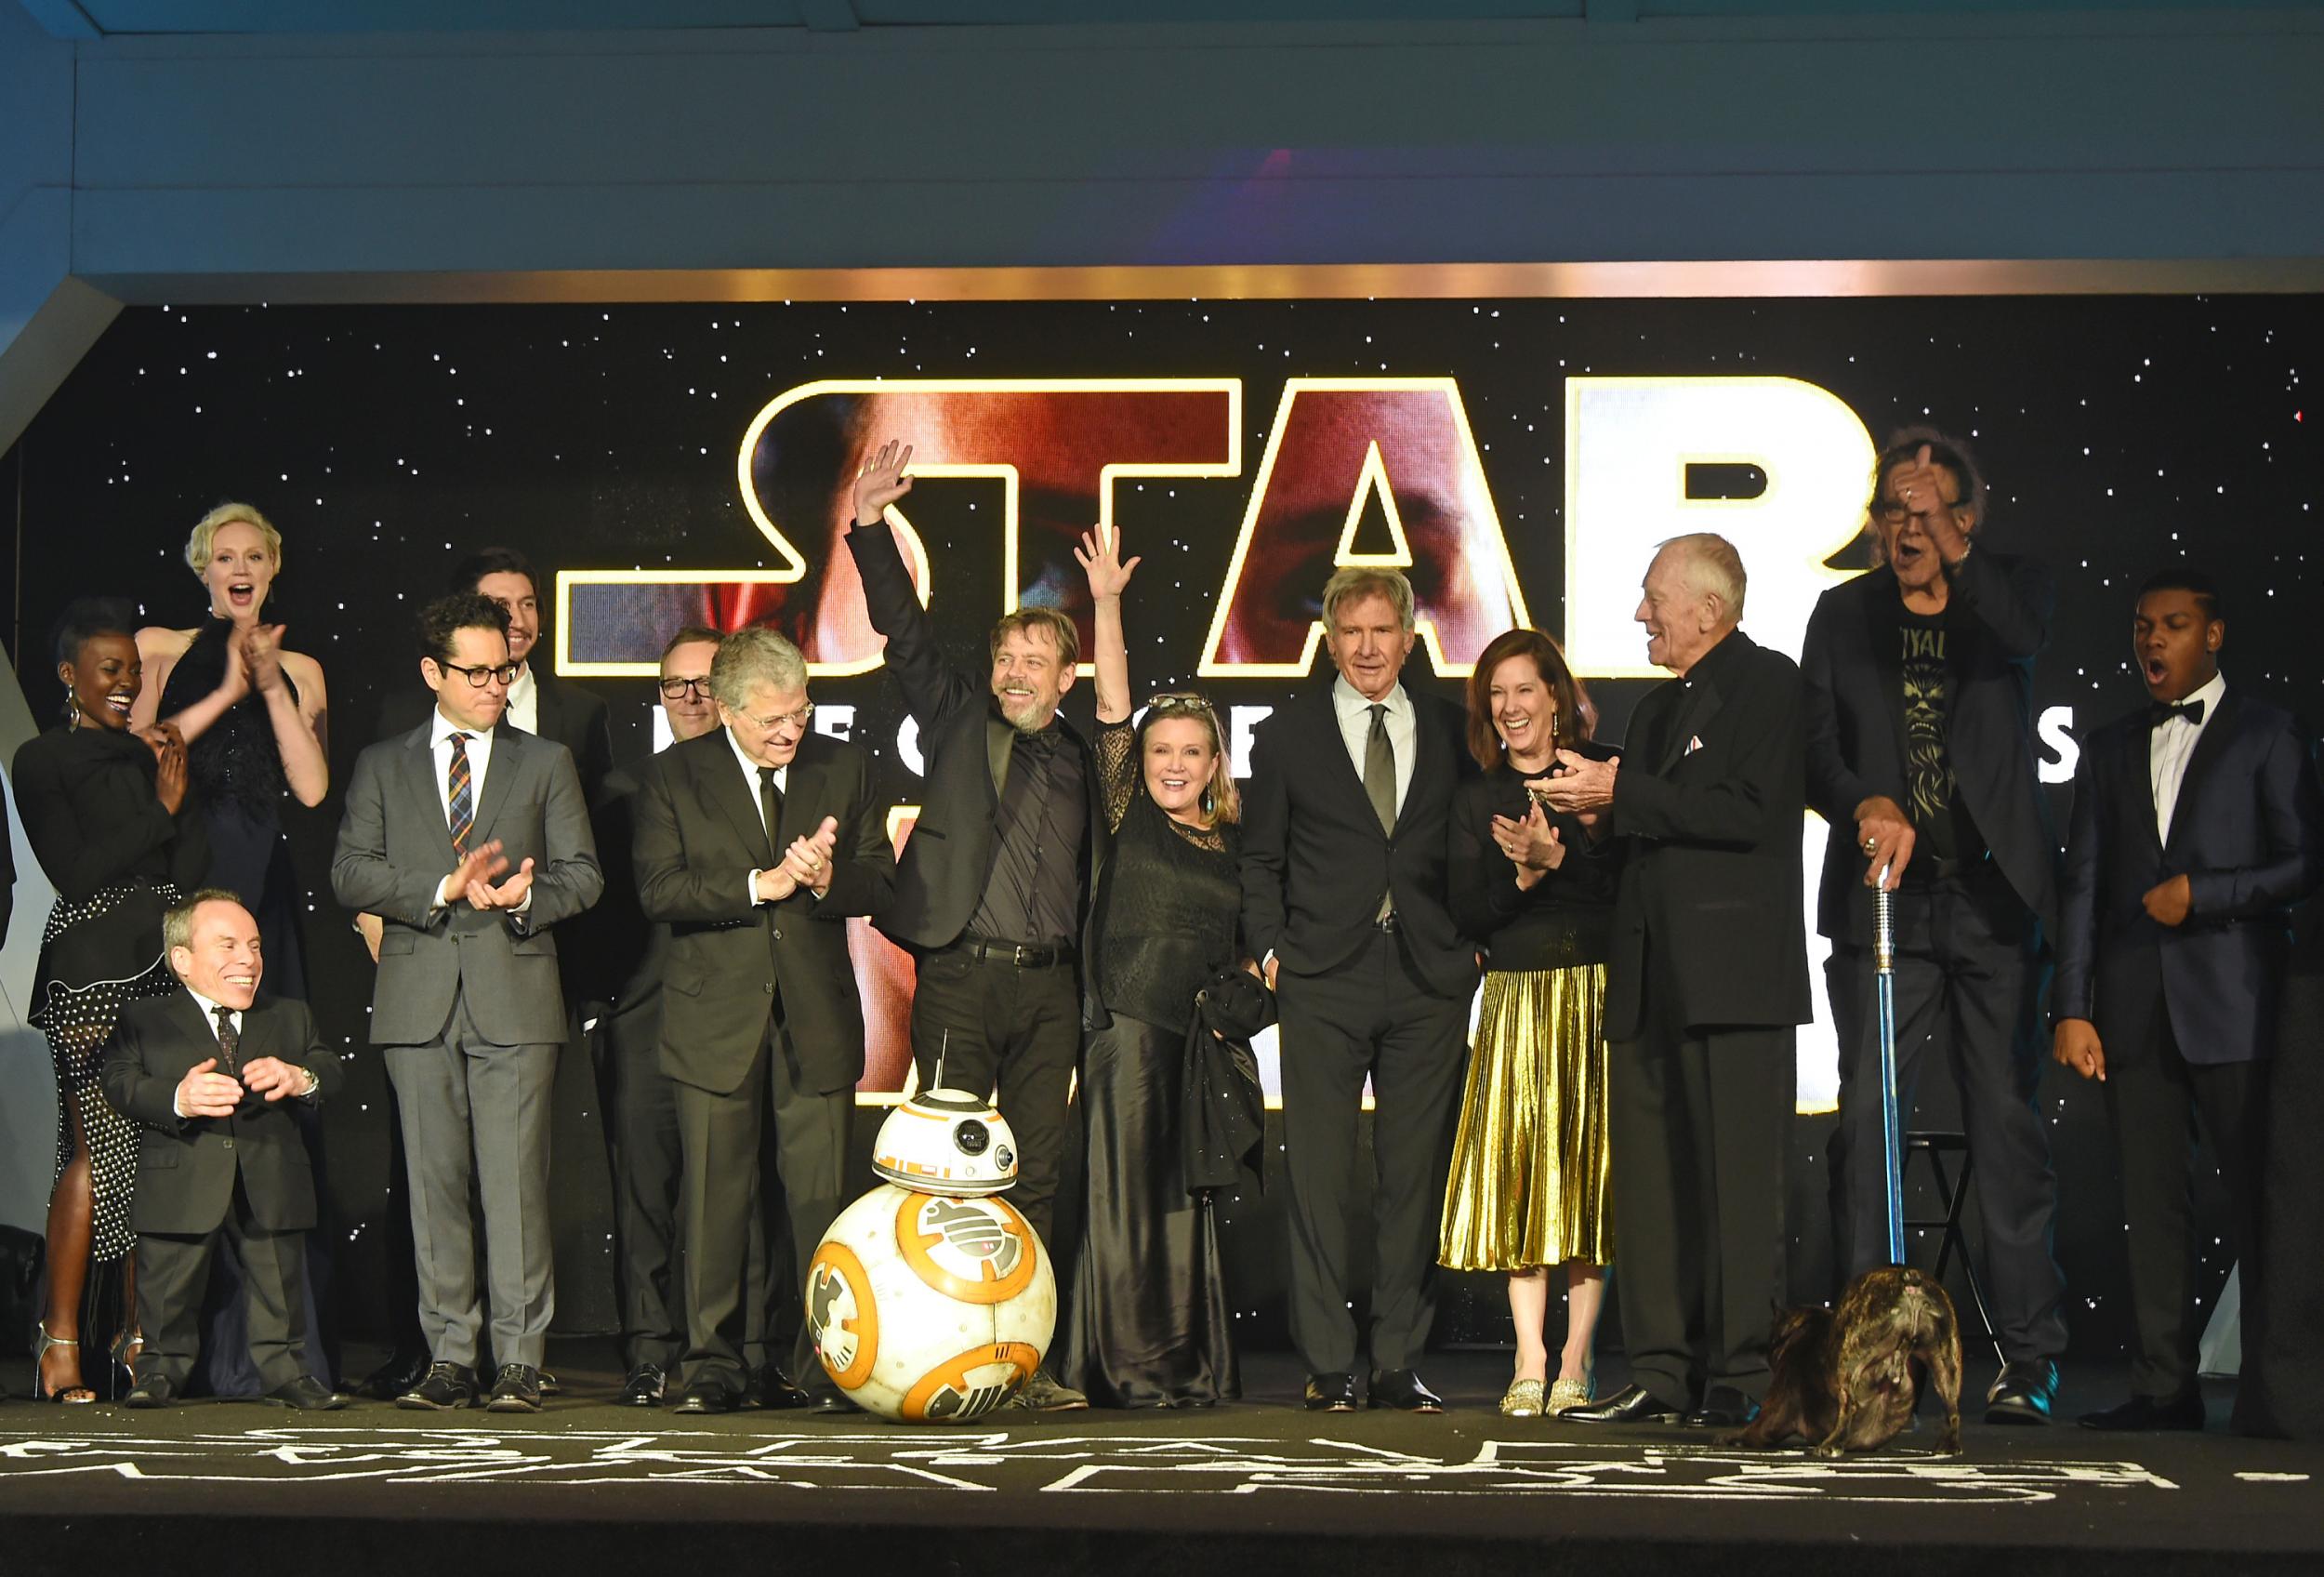 The Star Wars: The Force Awakens cast greet fans at the London premiere